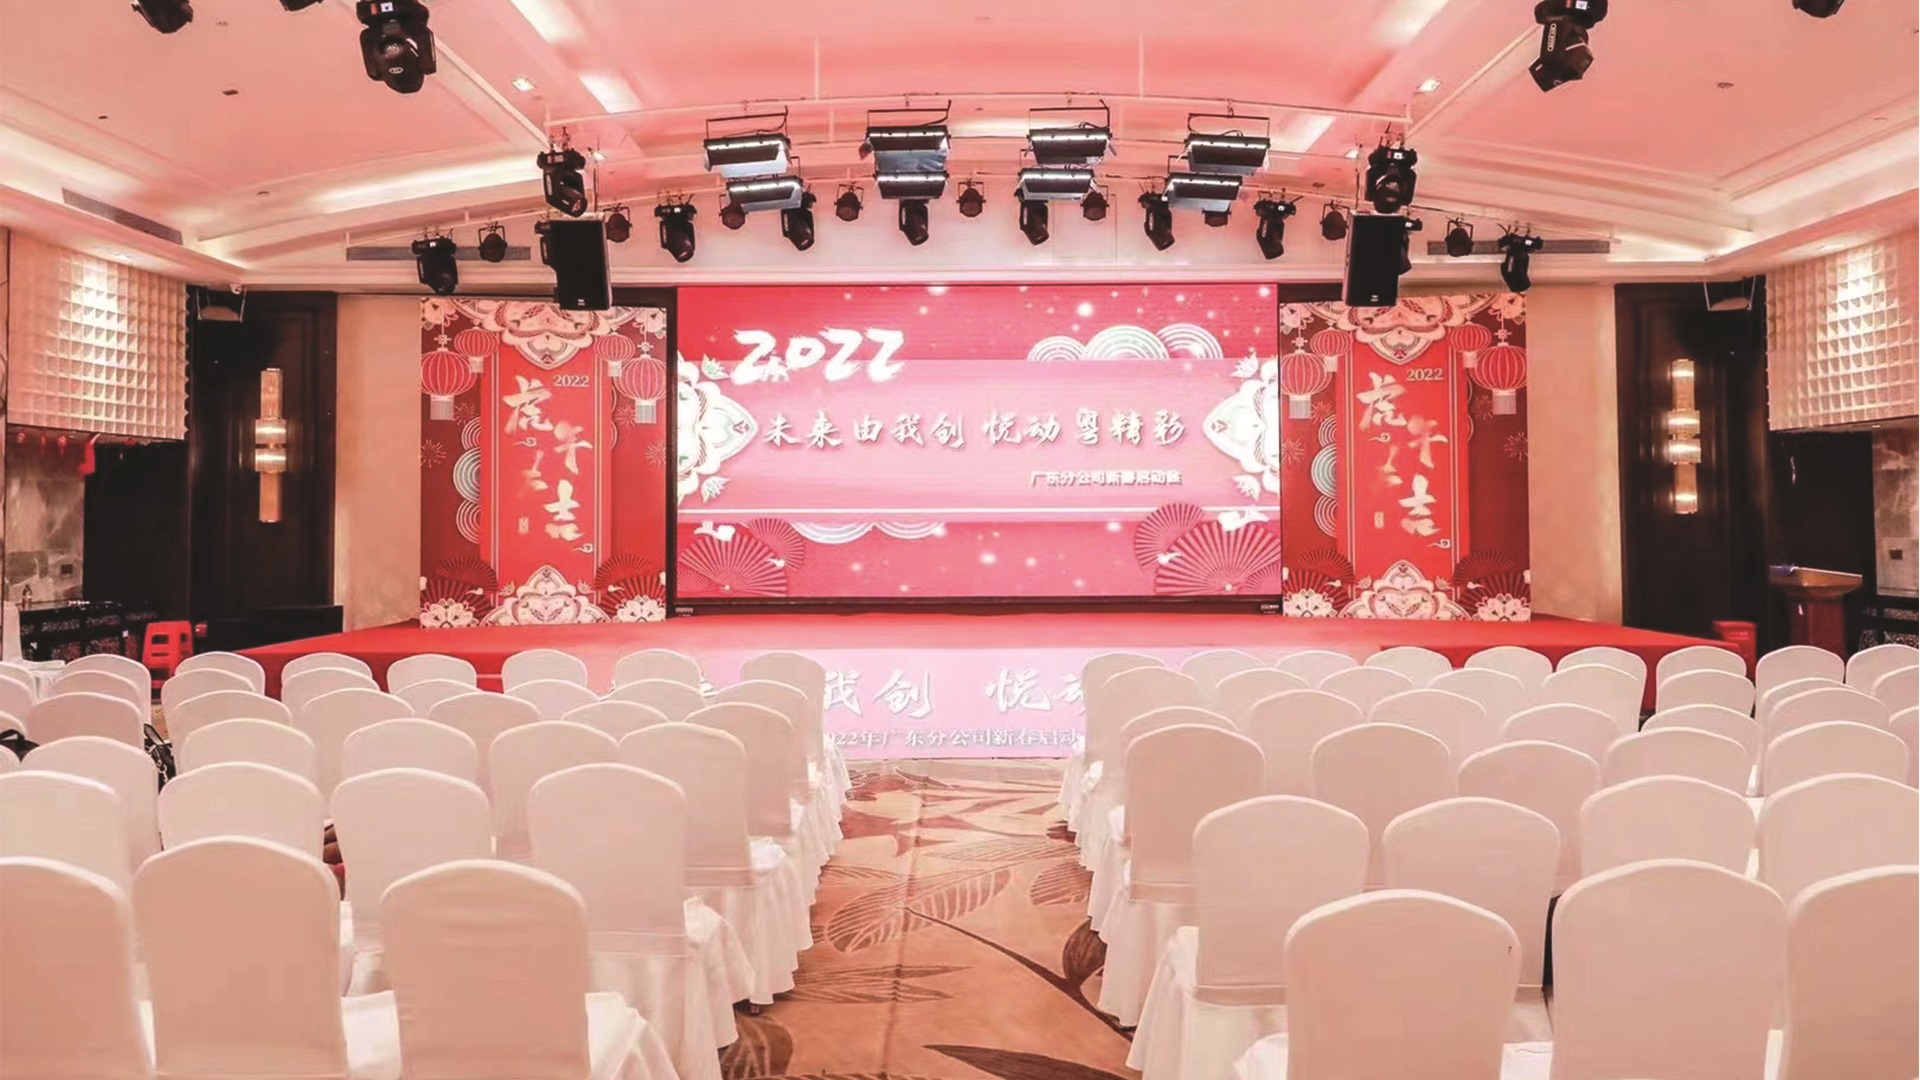 The Annual Conference for The Beginning of Chinese Lunar New Year_D2 Studio